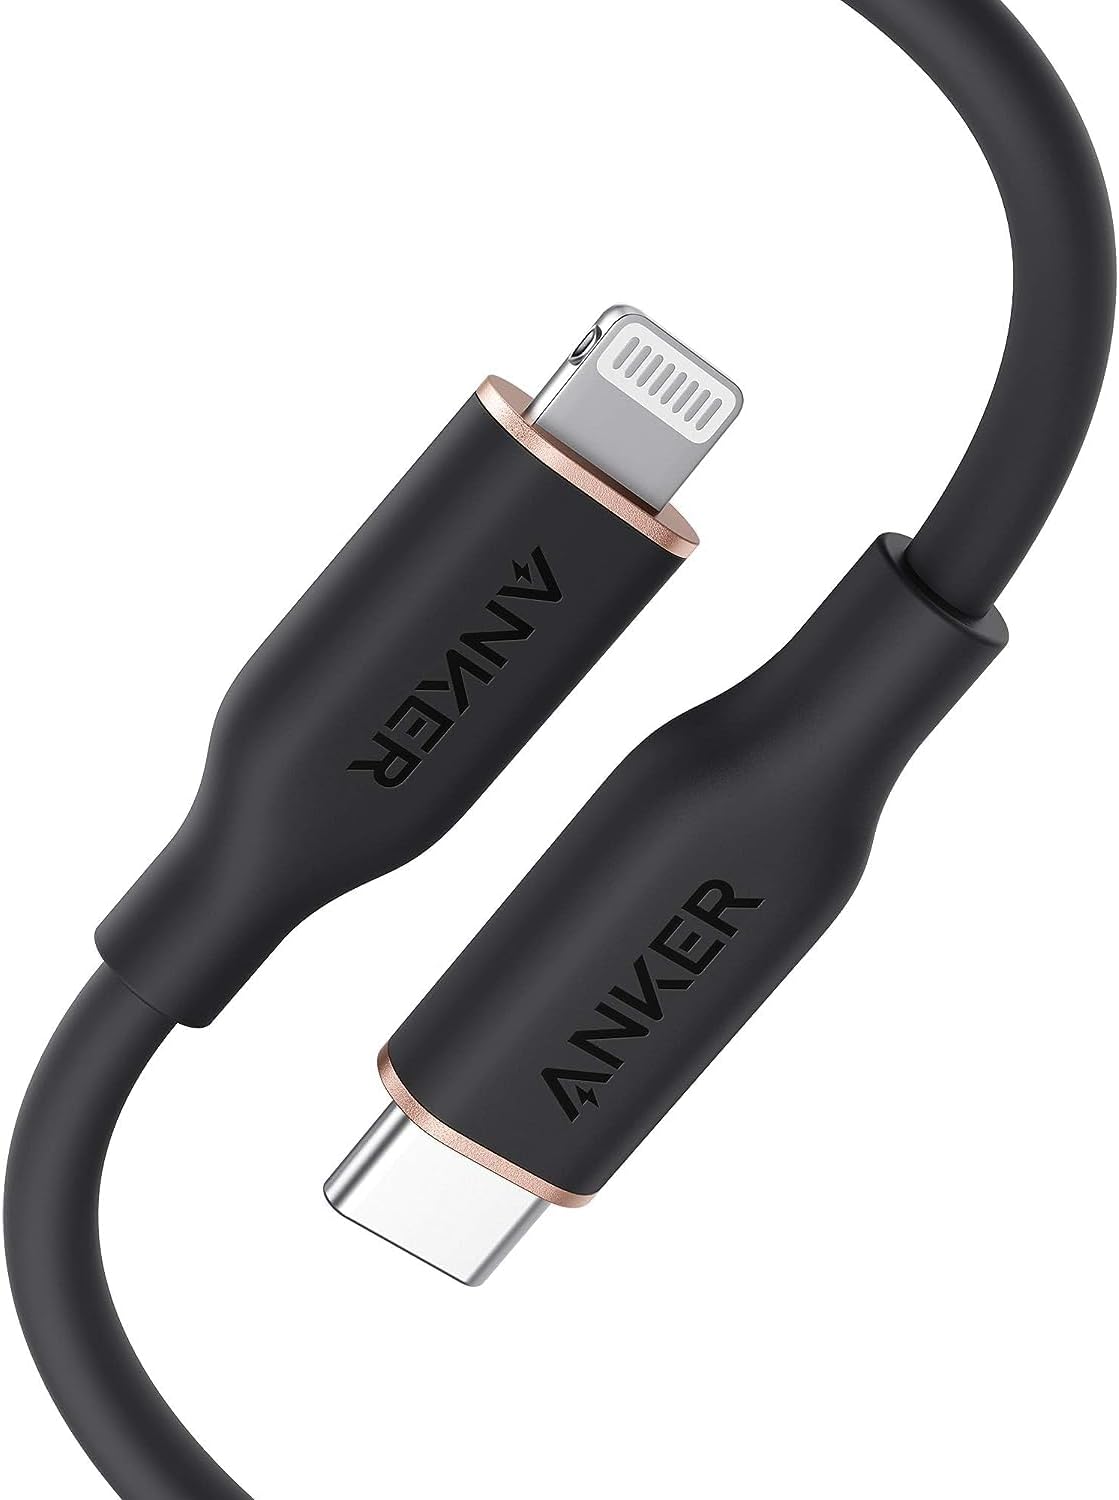 Anker PowerLine lll Flow USB-C with Lightning Connector (3ft) - Miles Telecom Trading LLC